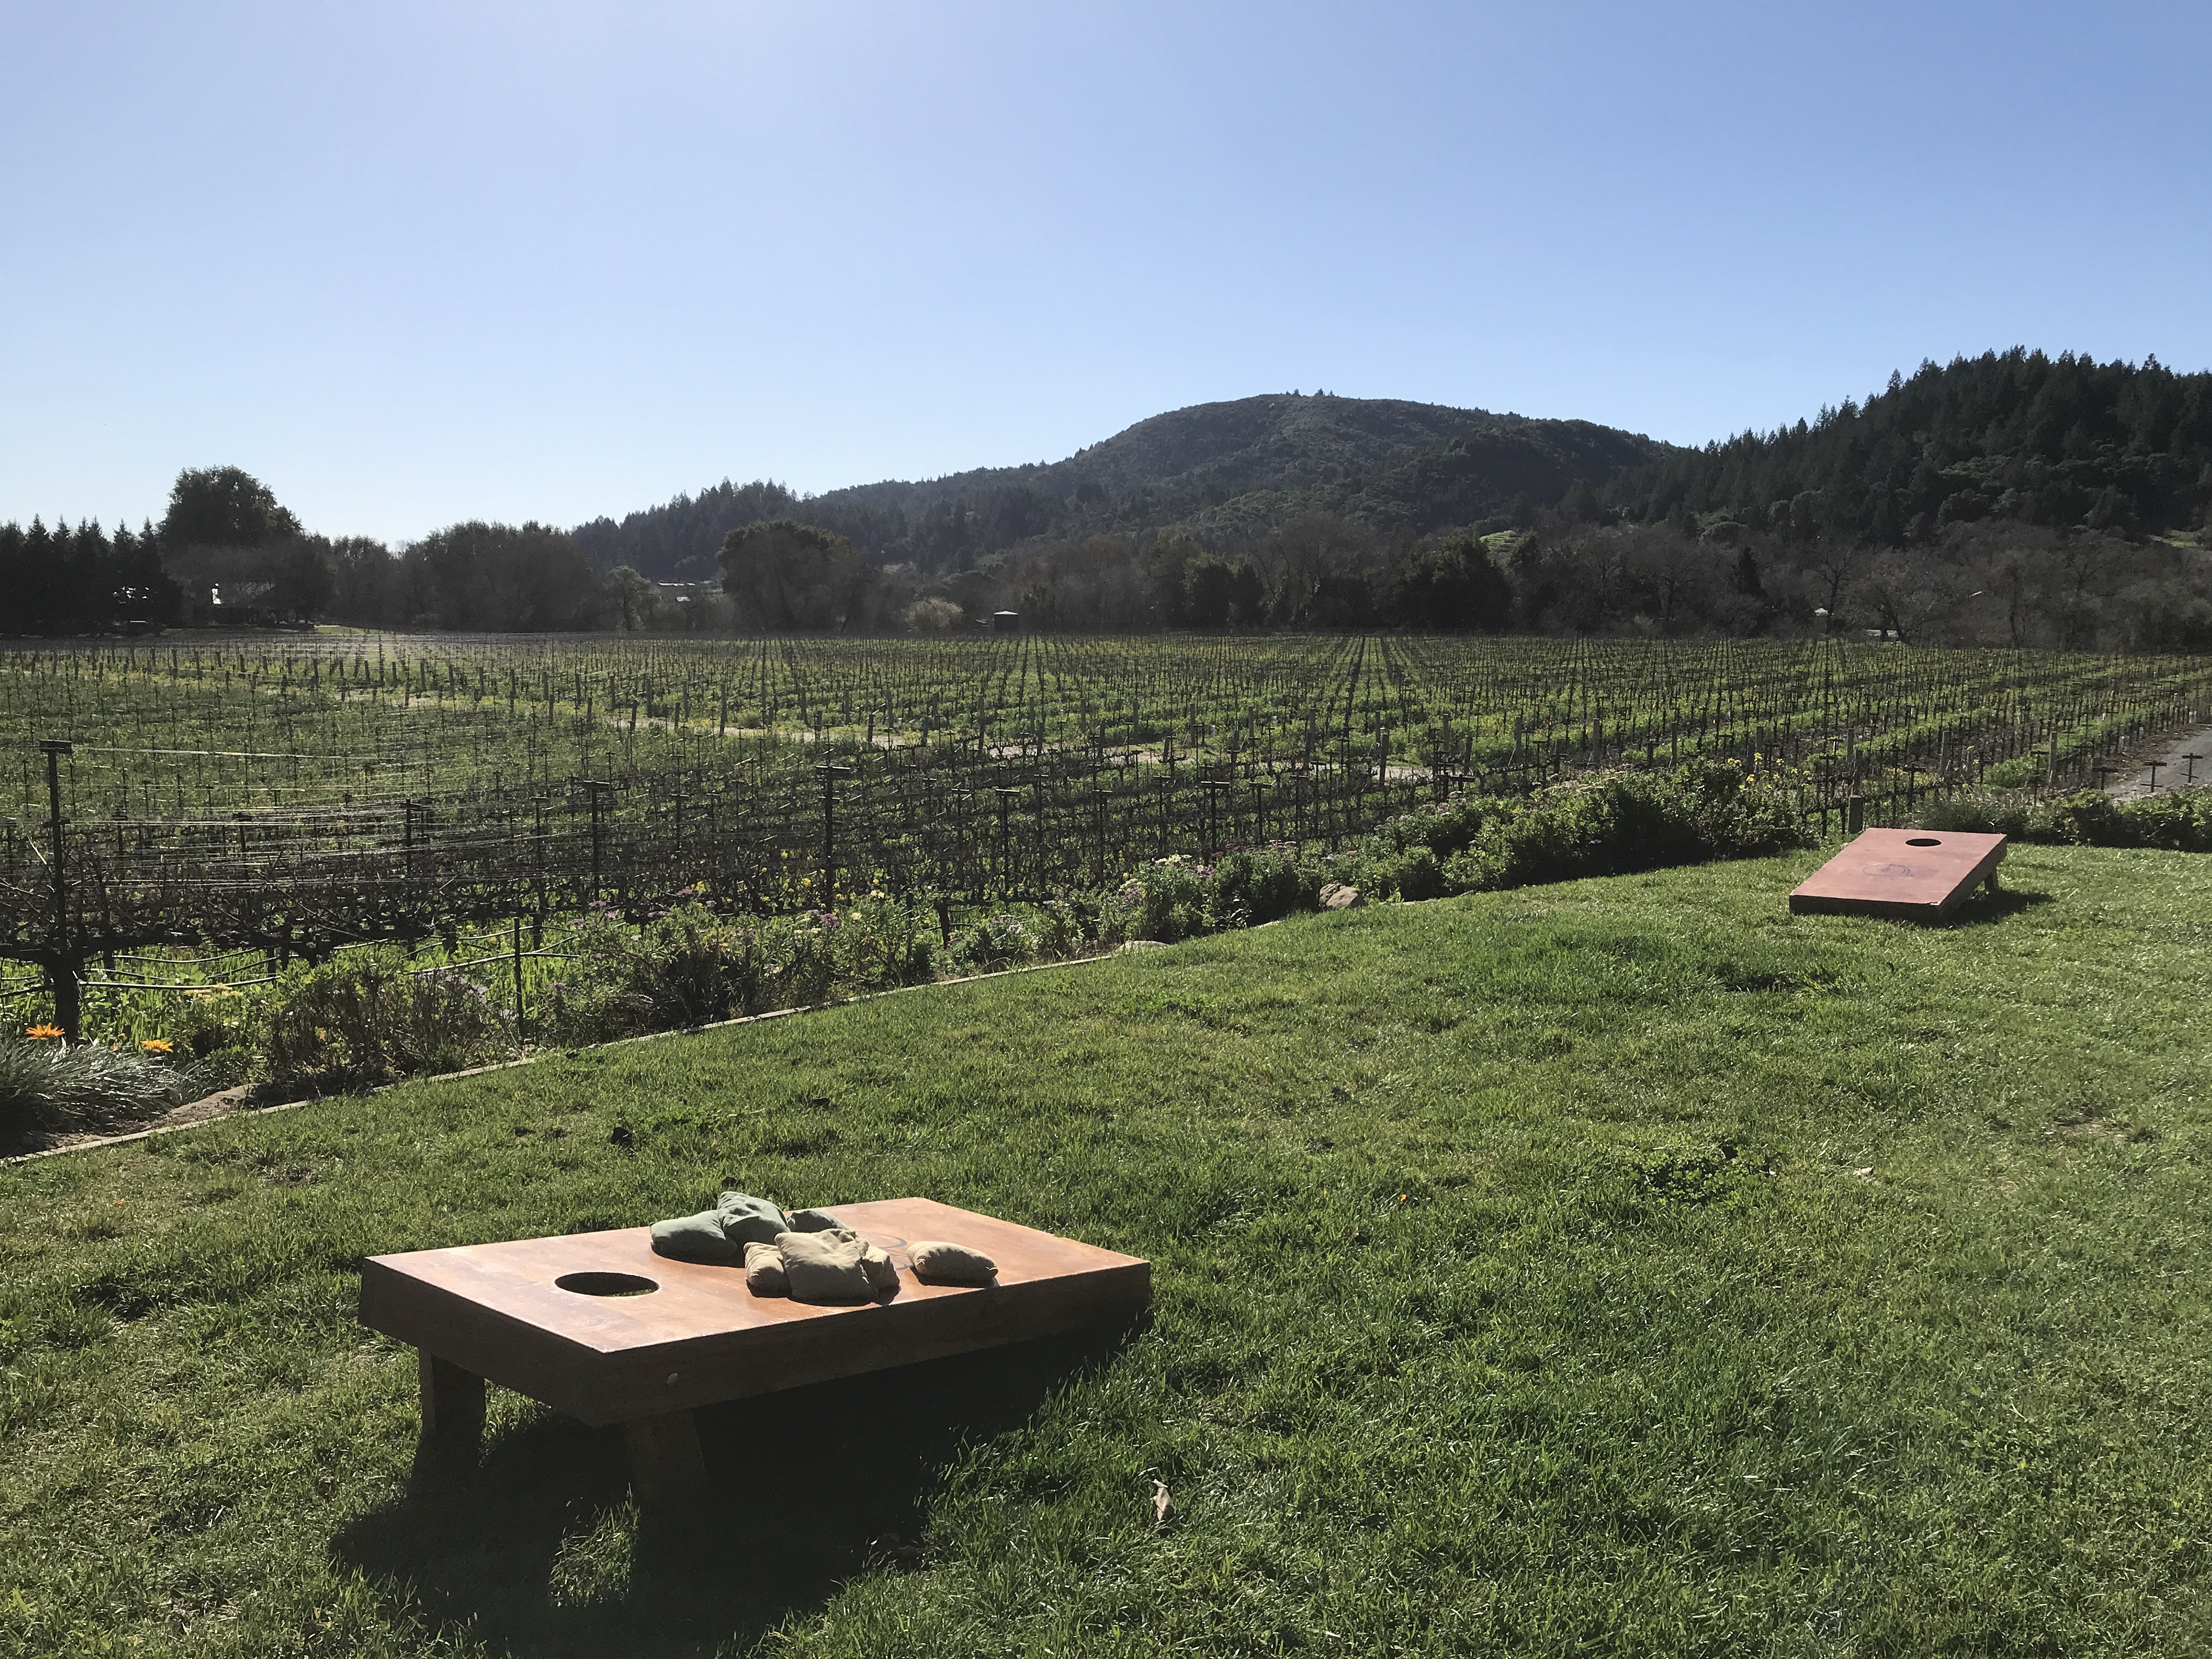 Ultimate List of Kid-Friendly Wineries in Sonoma | San Francisco with Kids | Family Friendly Wineries | Henry and Andrew’s Guide (www.henryandandrewsguide.com)